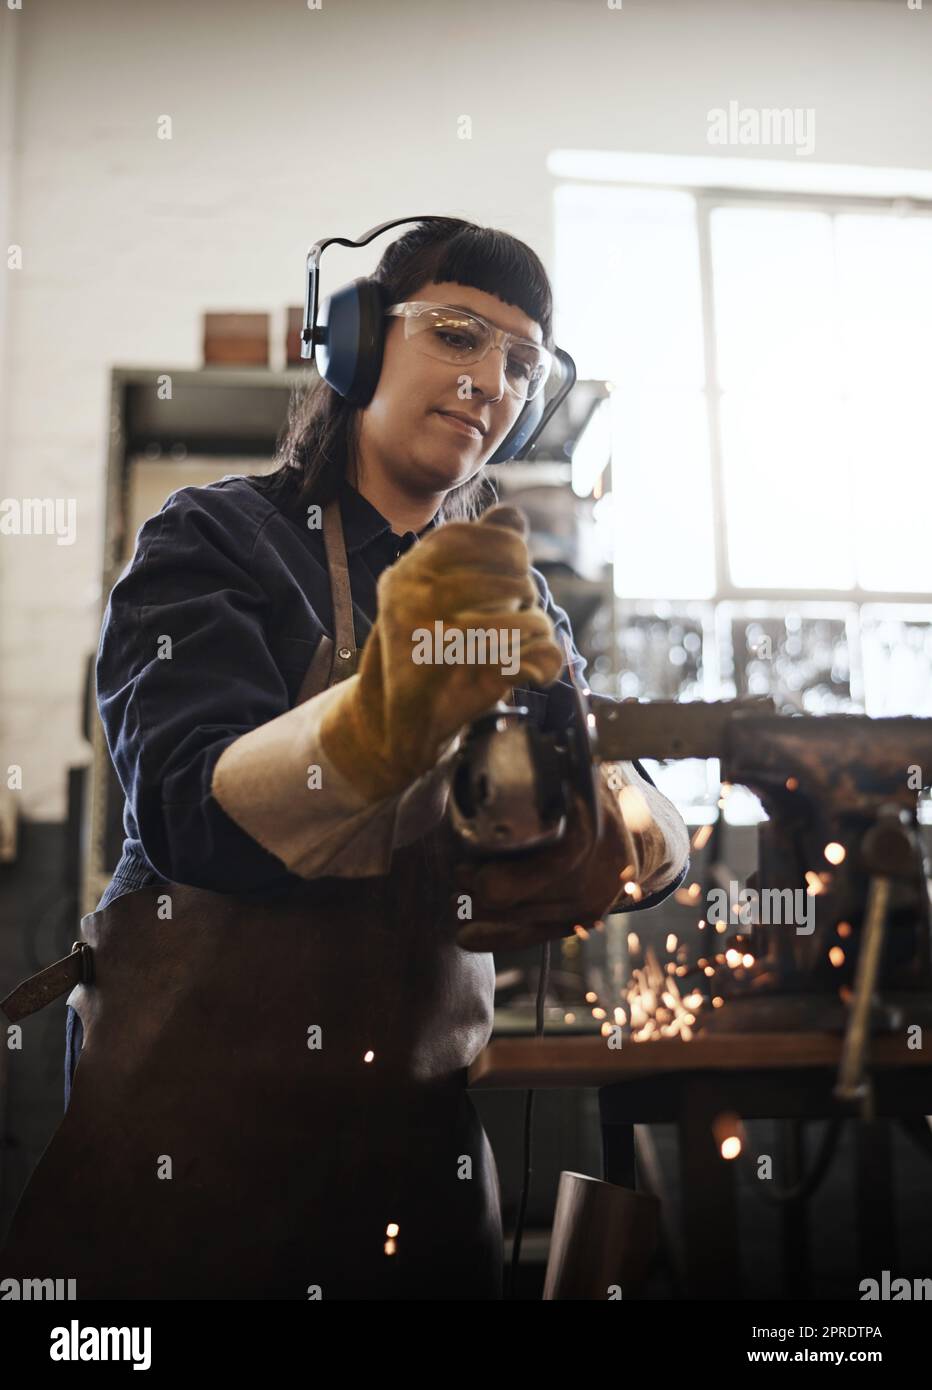 Smoothing it out. an attractive young female artisan using an angle grinder in her workshop. Stock Photo